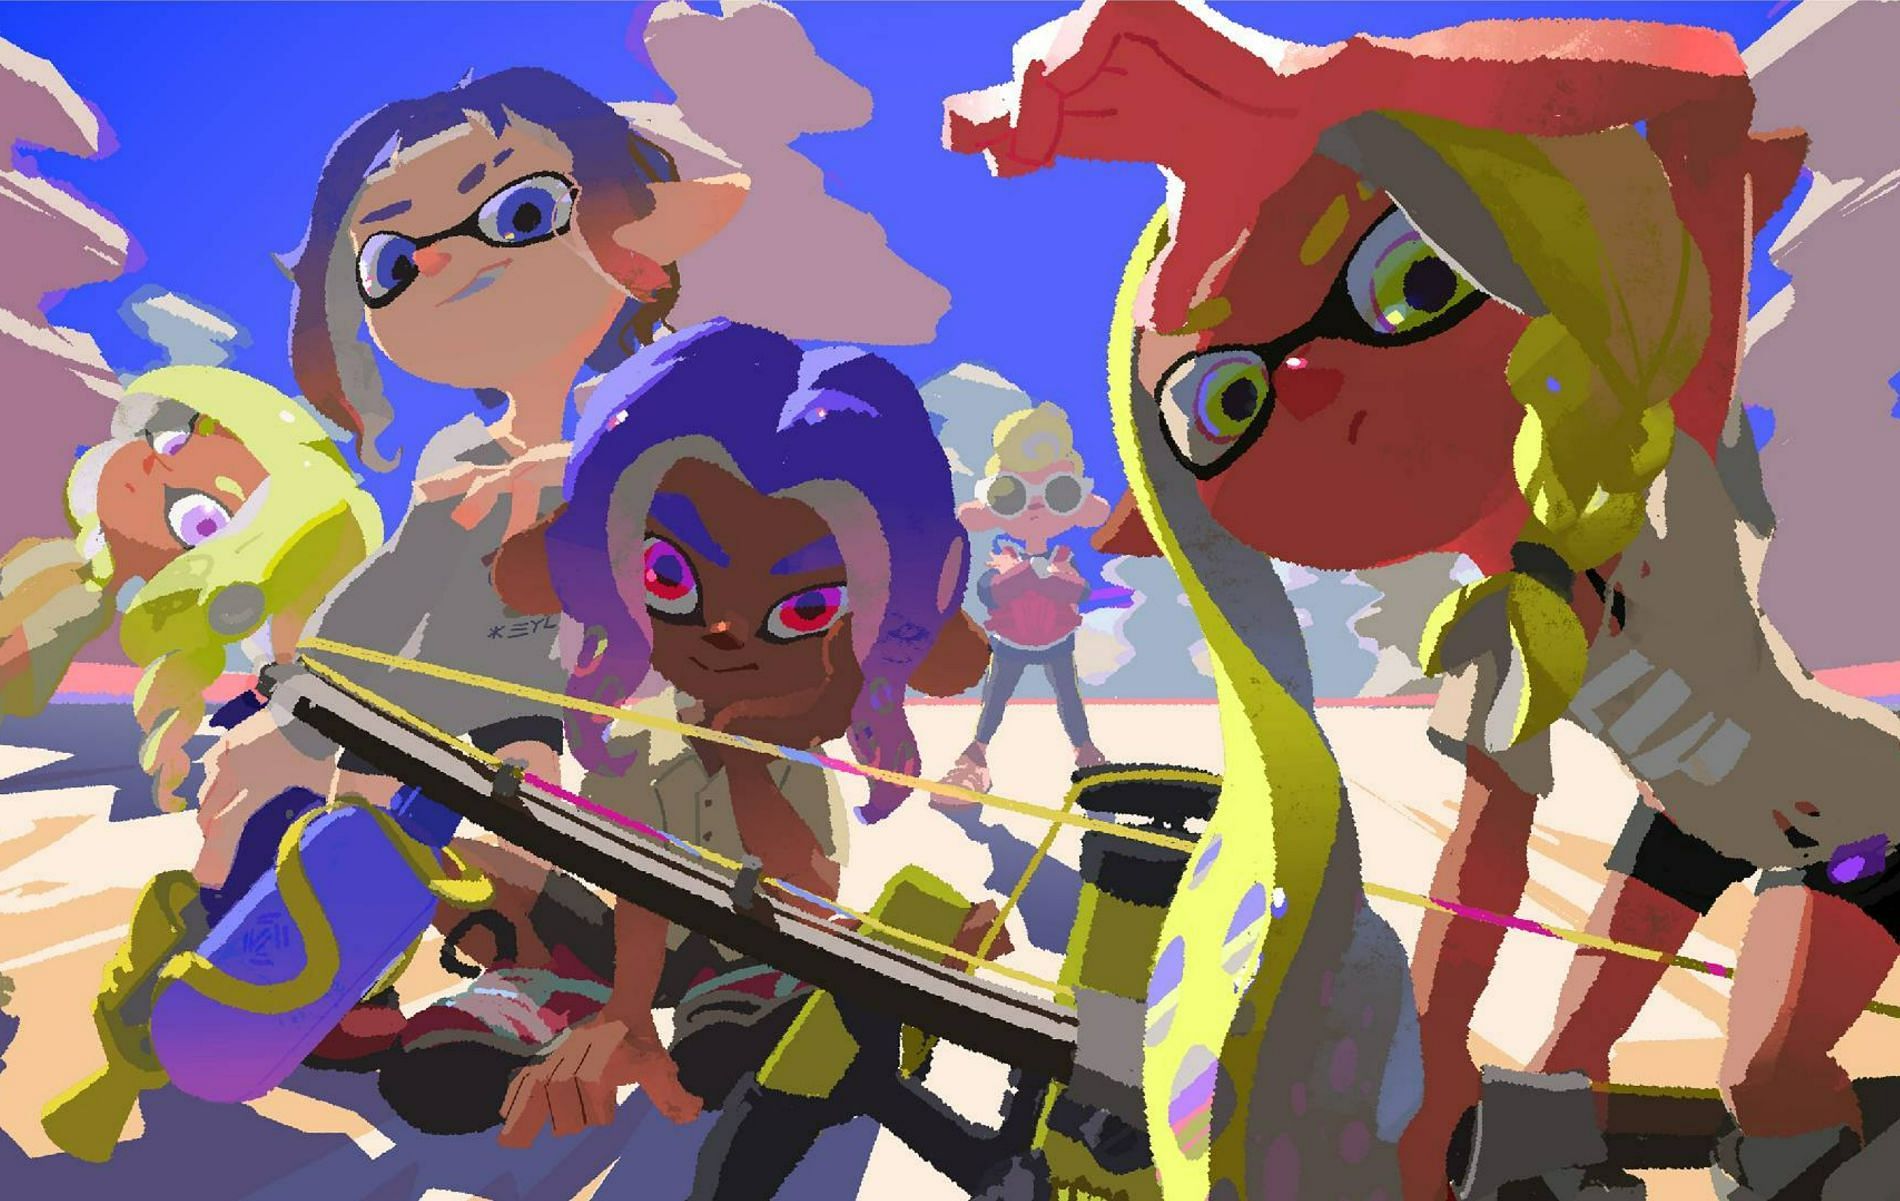 Splatoon 3 SplatNet 3 guide: How to enable voice chat in the game